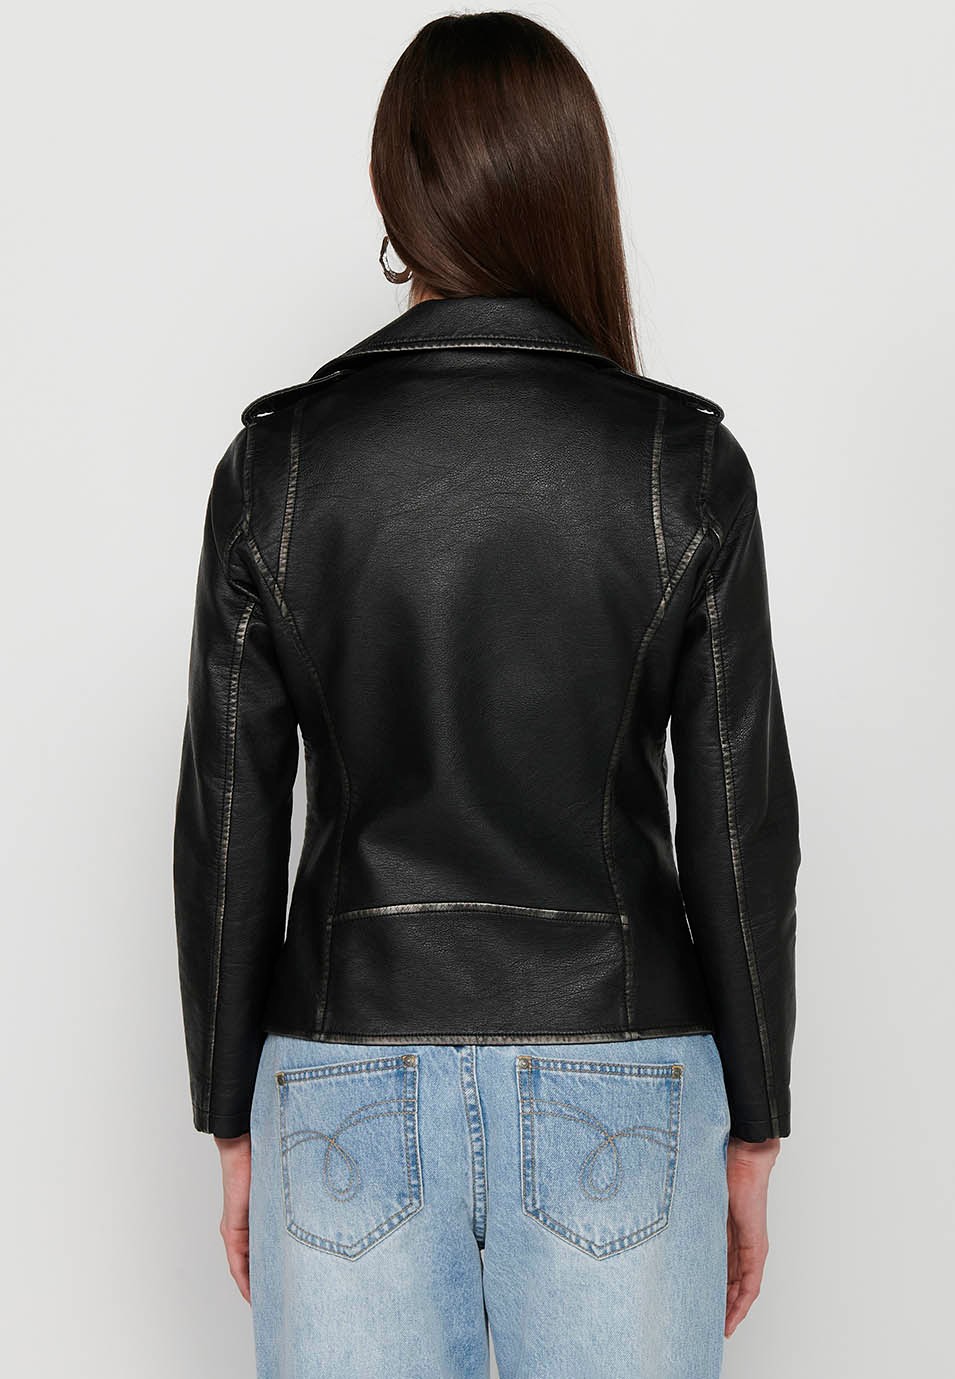 Leather-effect double-breasted jacket with lapel collar and front zipper closure in Black for Women 5